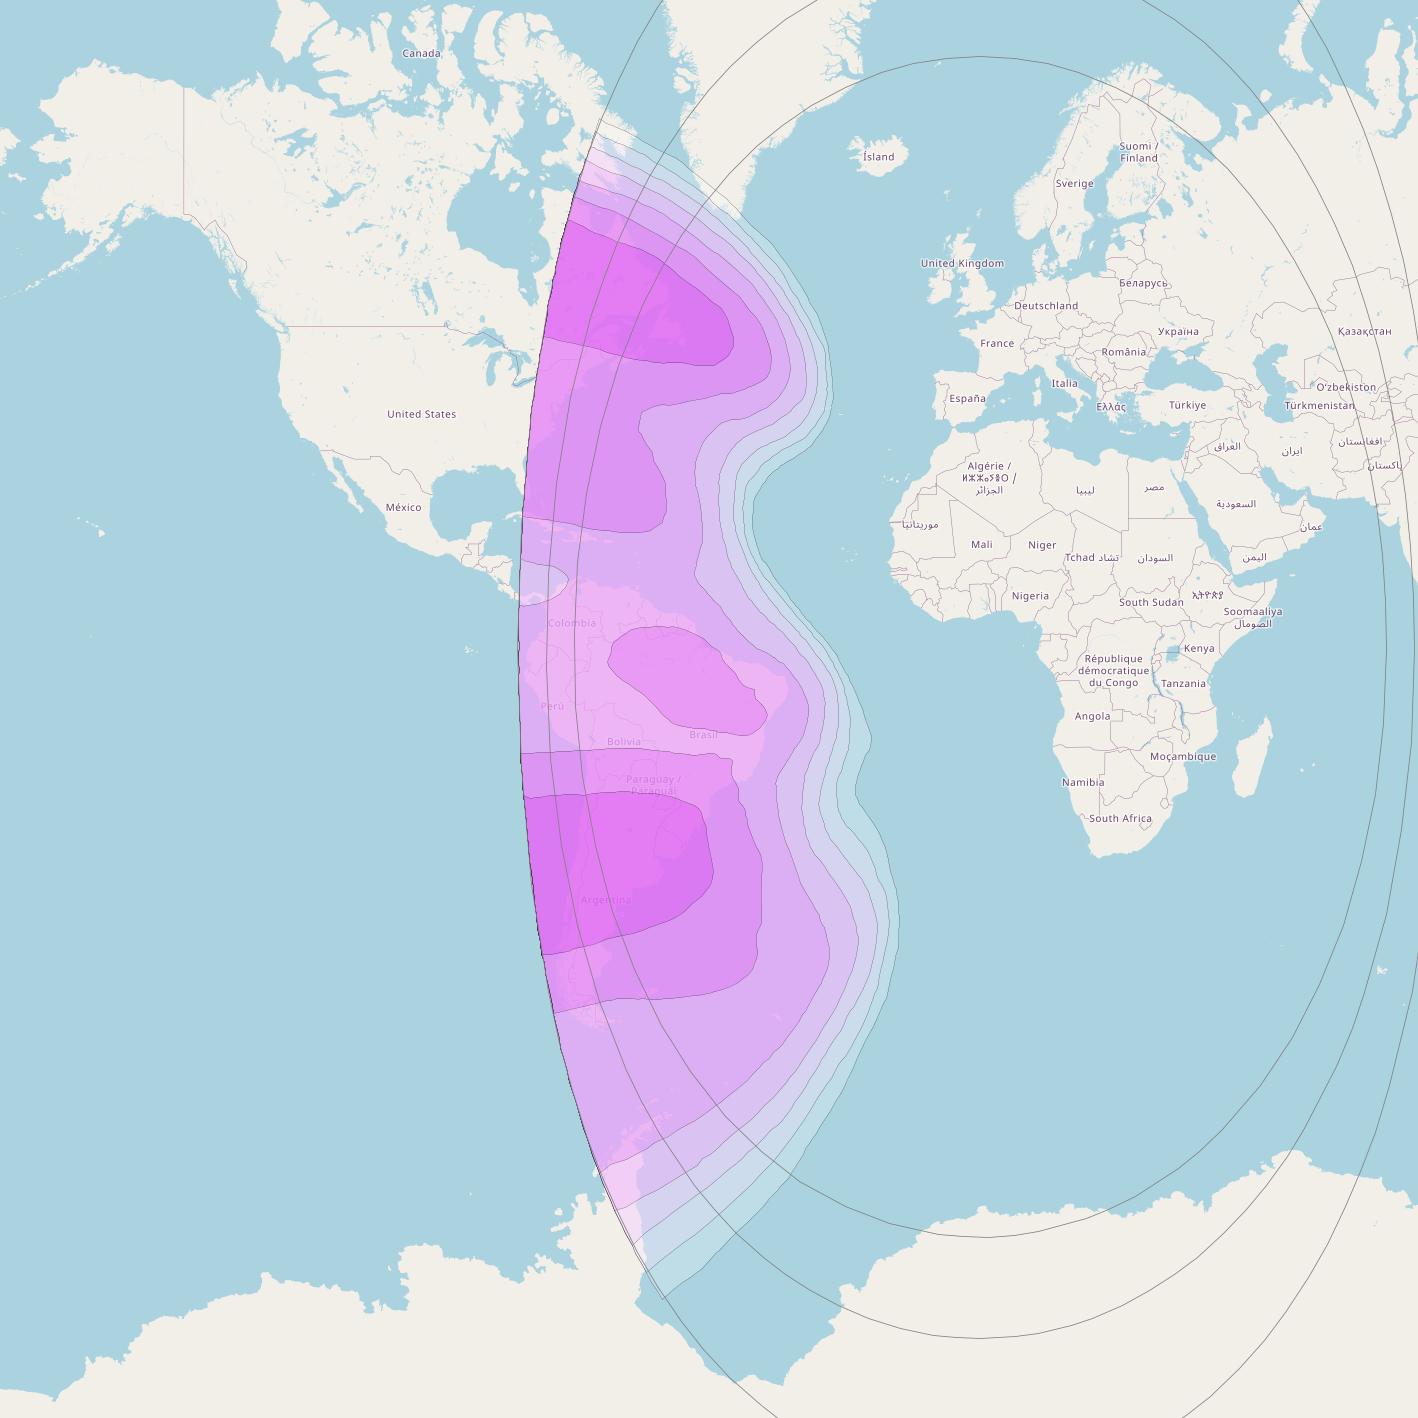 Intelsat 10-02 at 1° W downlink C-band West Hemi Beam coverage map